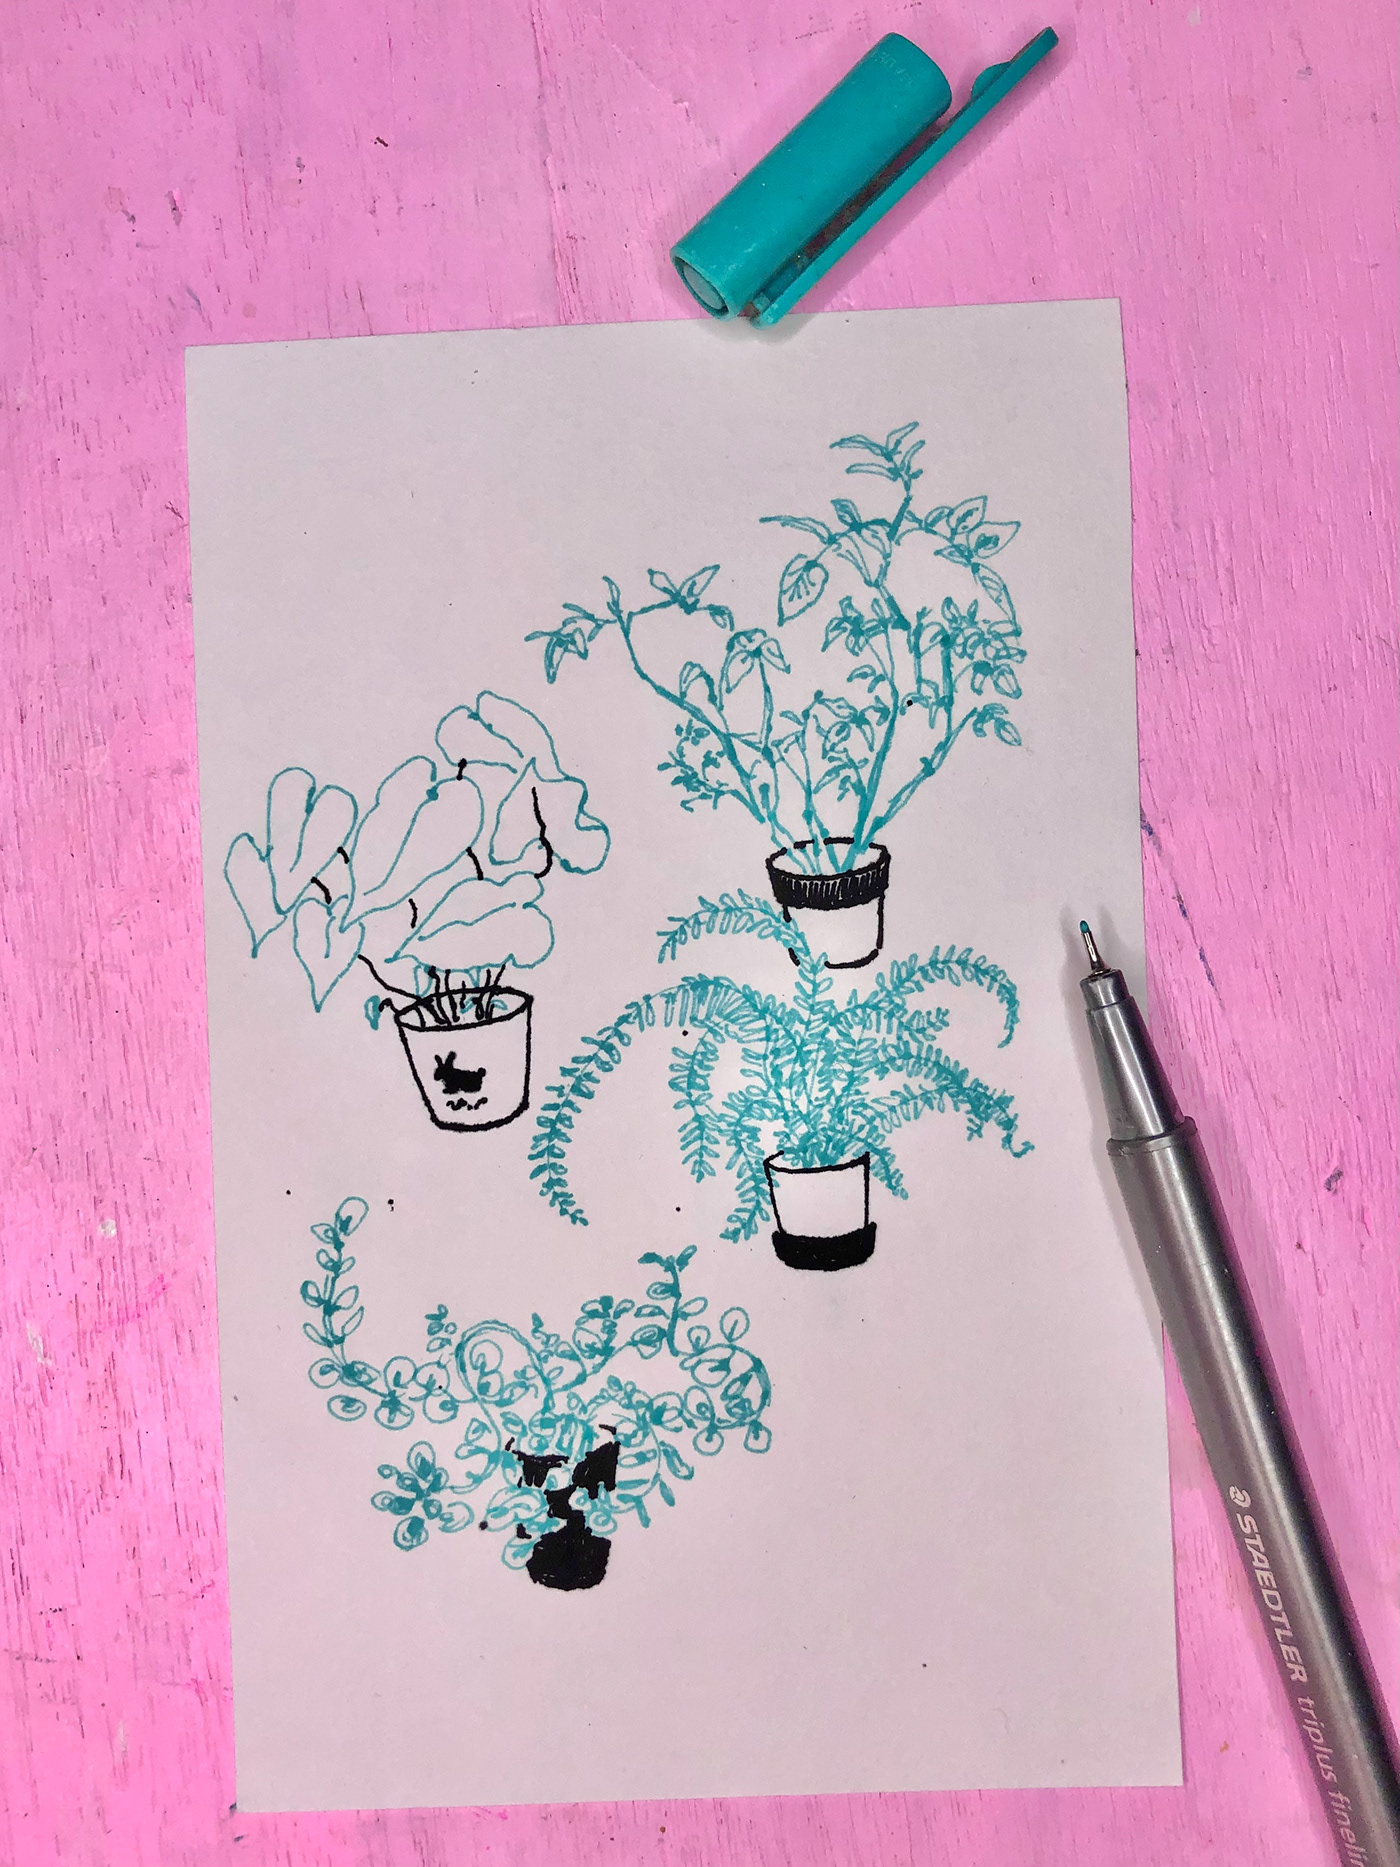 fountain pen Drawing  sketchbook plants ink on paper paper draw Roses Tree  Flowers line art comic black ink write story Holiday relax calm sketch life Hong Kong pens freehand story teller solitude healing therapy mood helpless pink colorful colors City Life city lonely 琉璃   art عربي